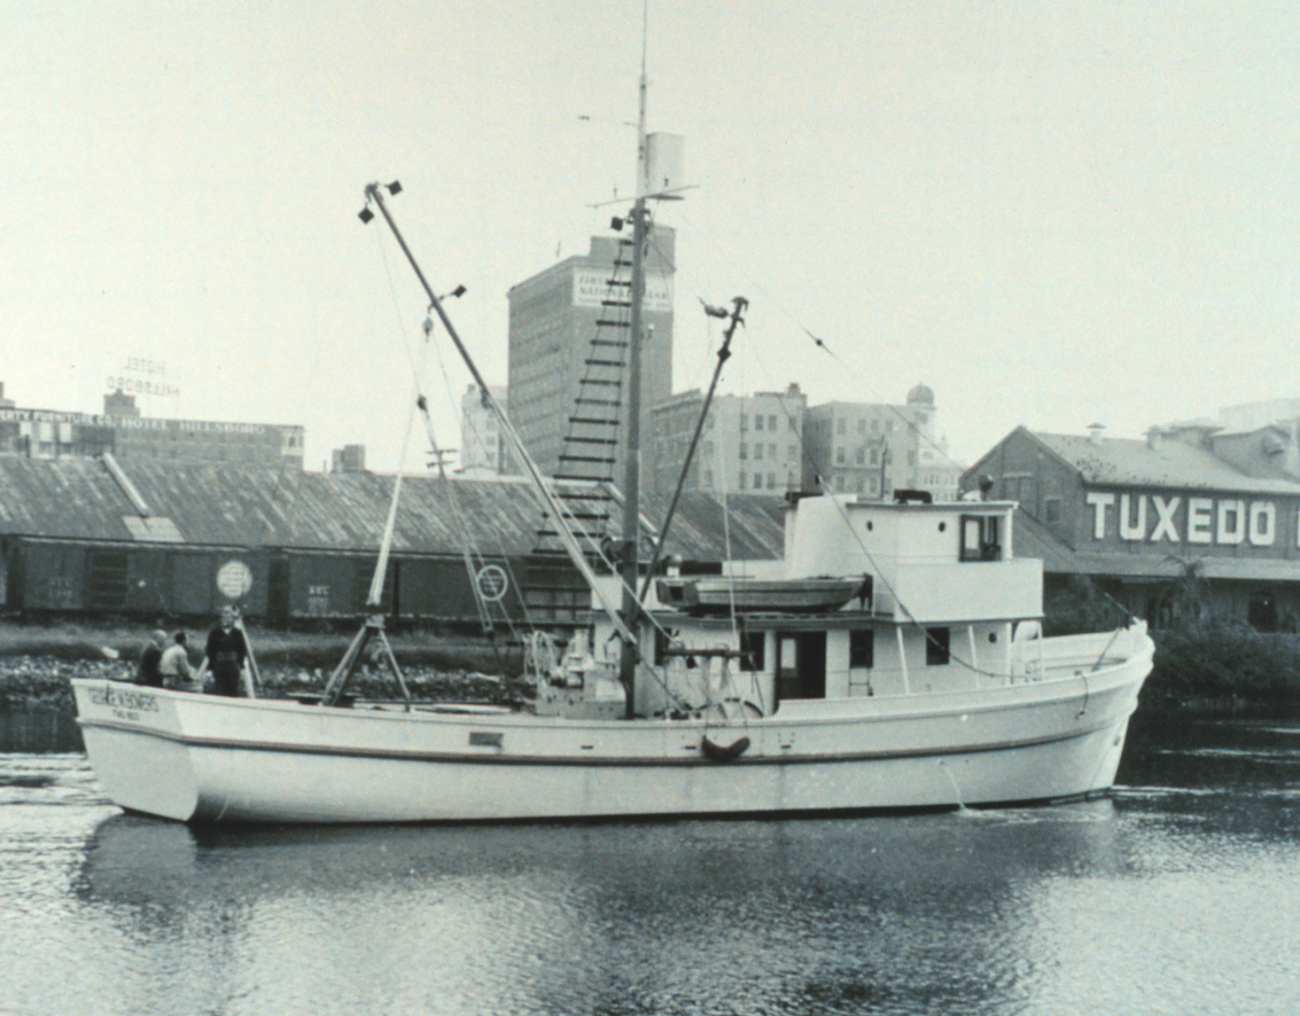 The Bureau of Commercial Fisheries Research Vessel GEORGE M